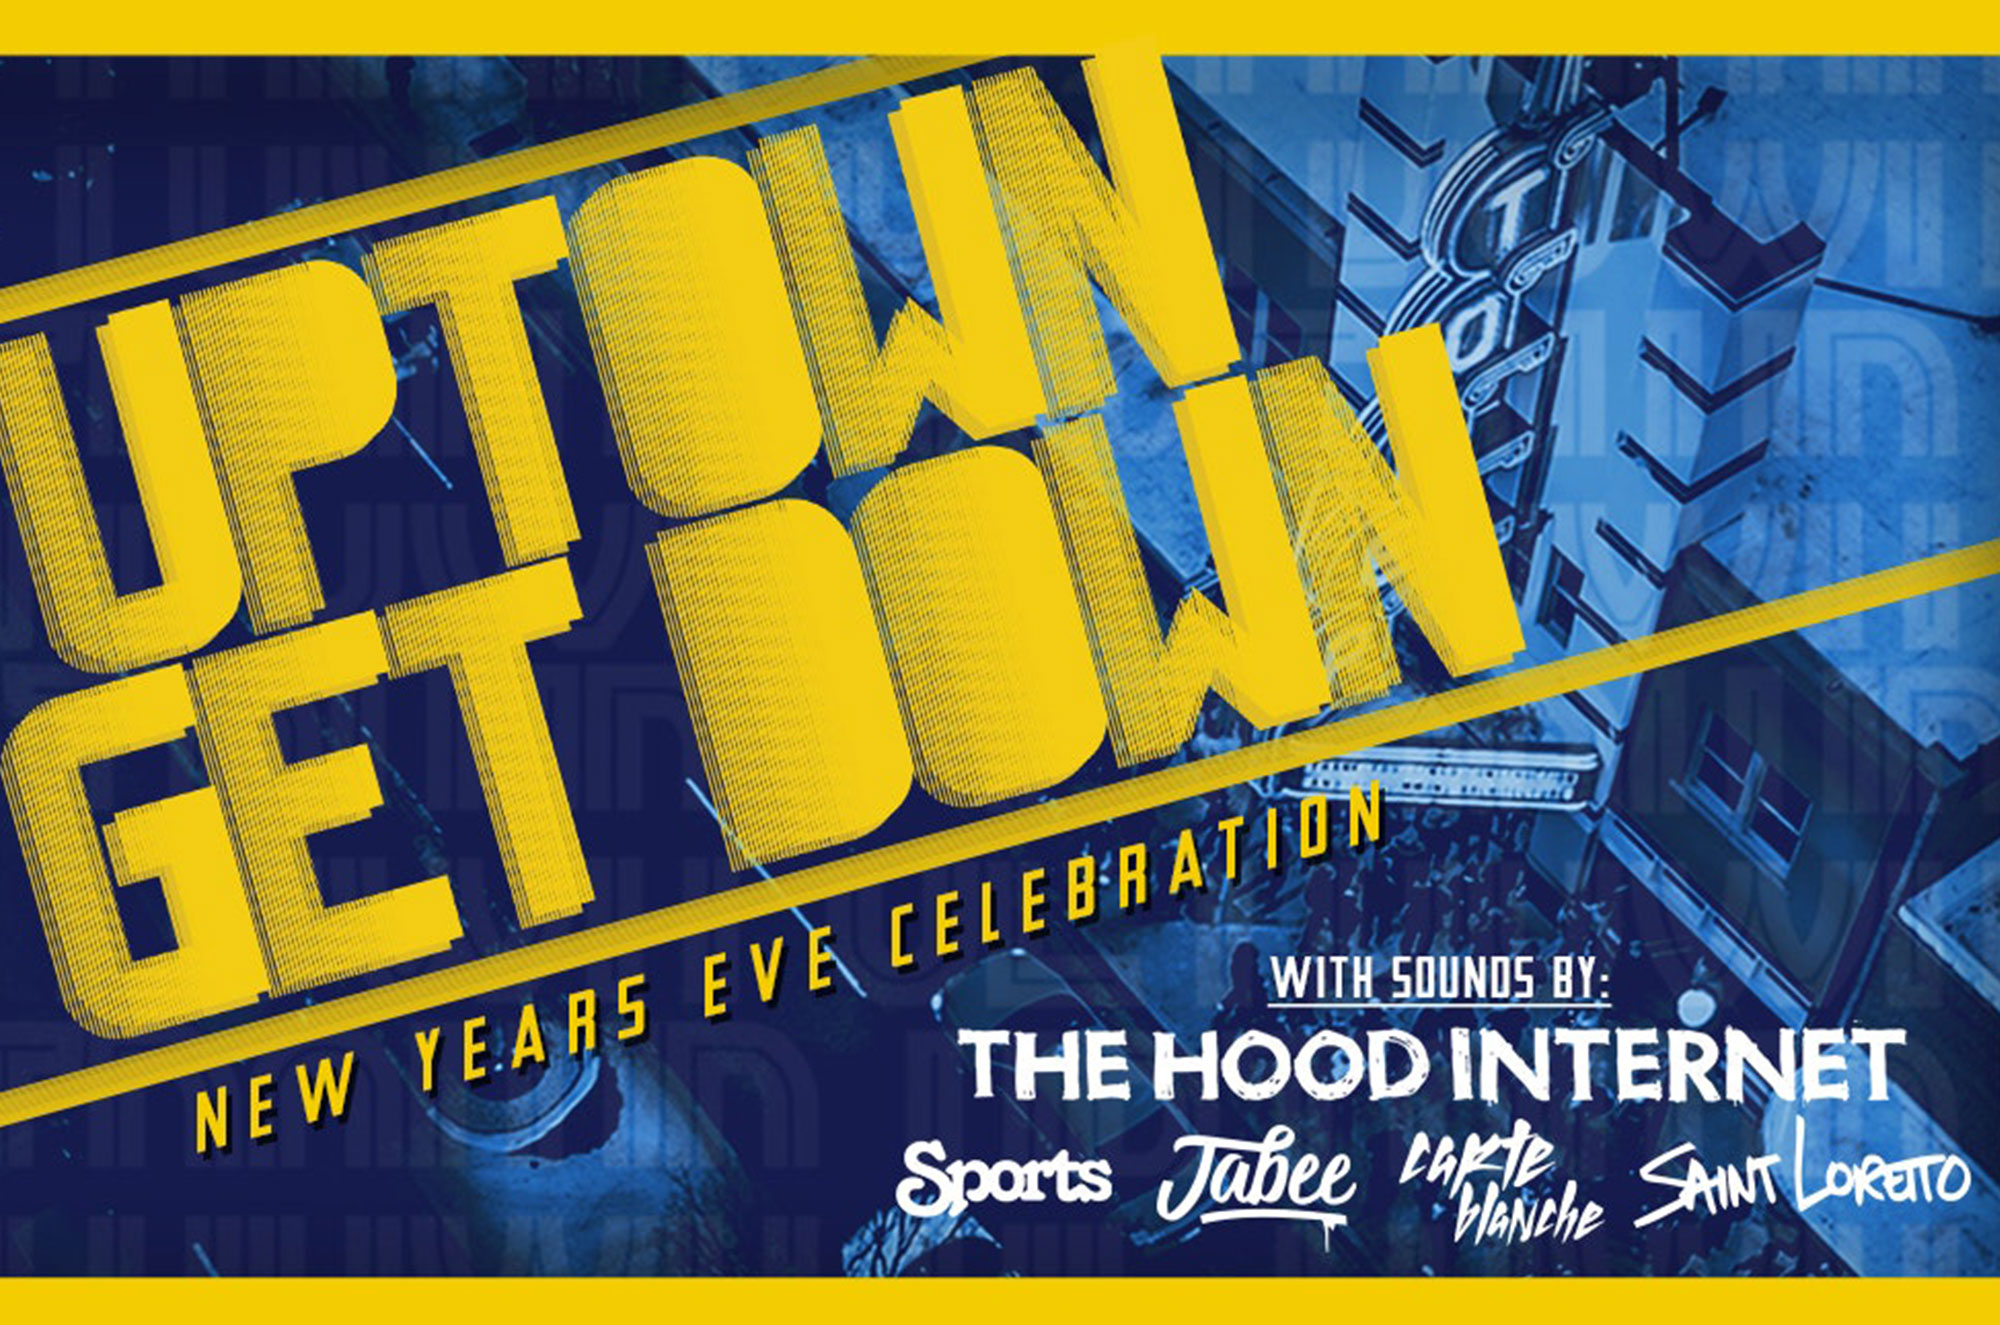 Uptown Getdown New Year's Eve Party